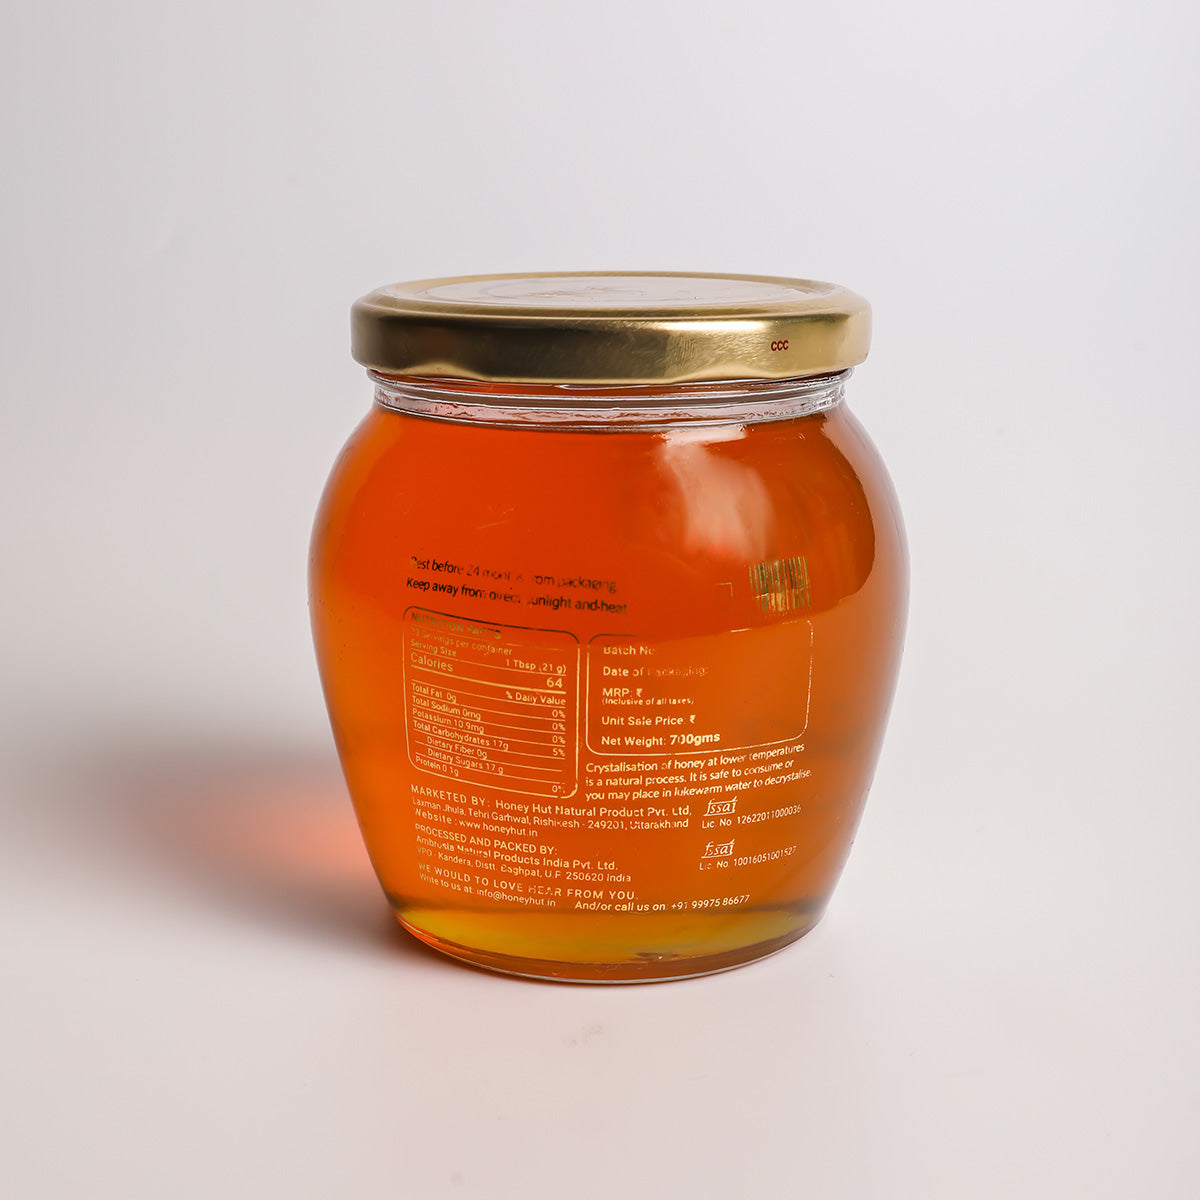 a close up of a orange jar on a white surface 